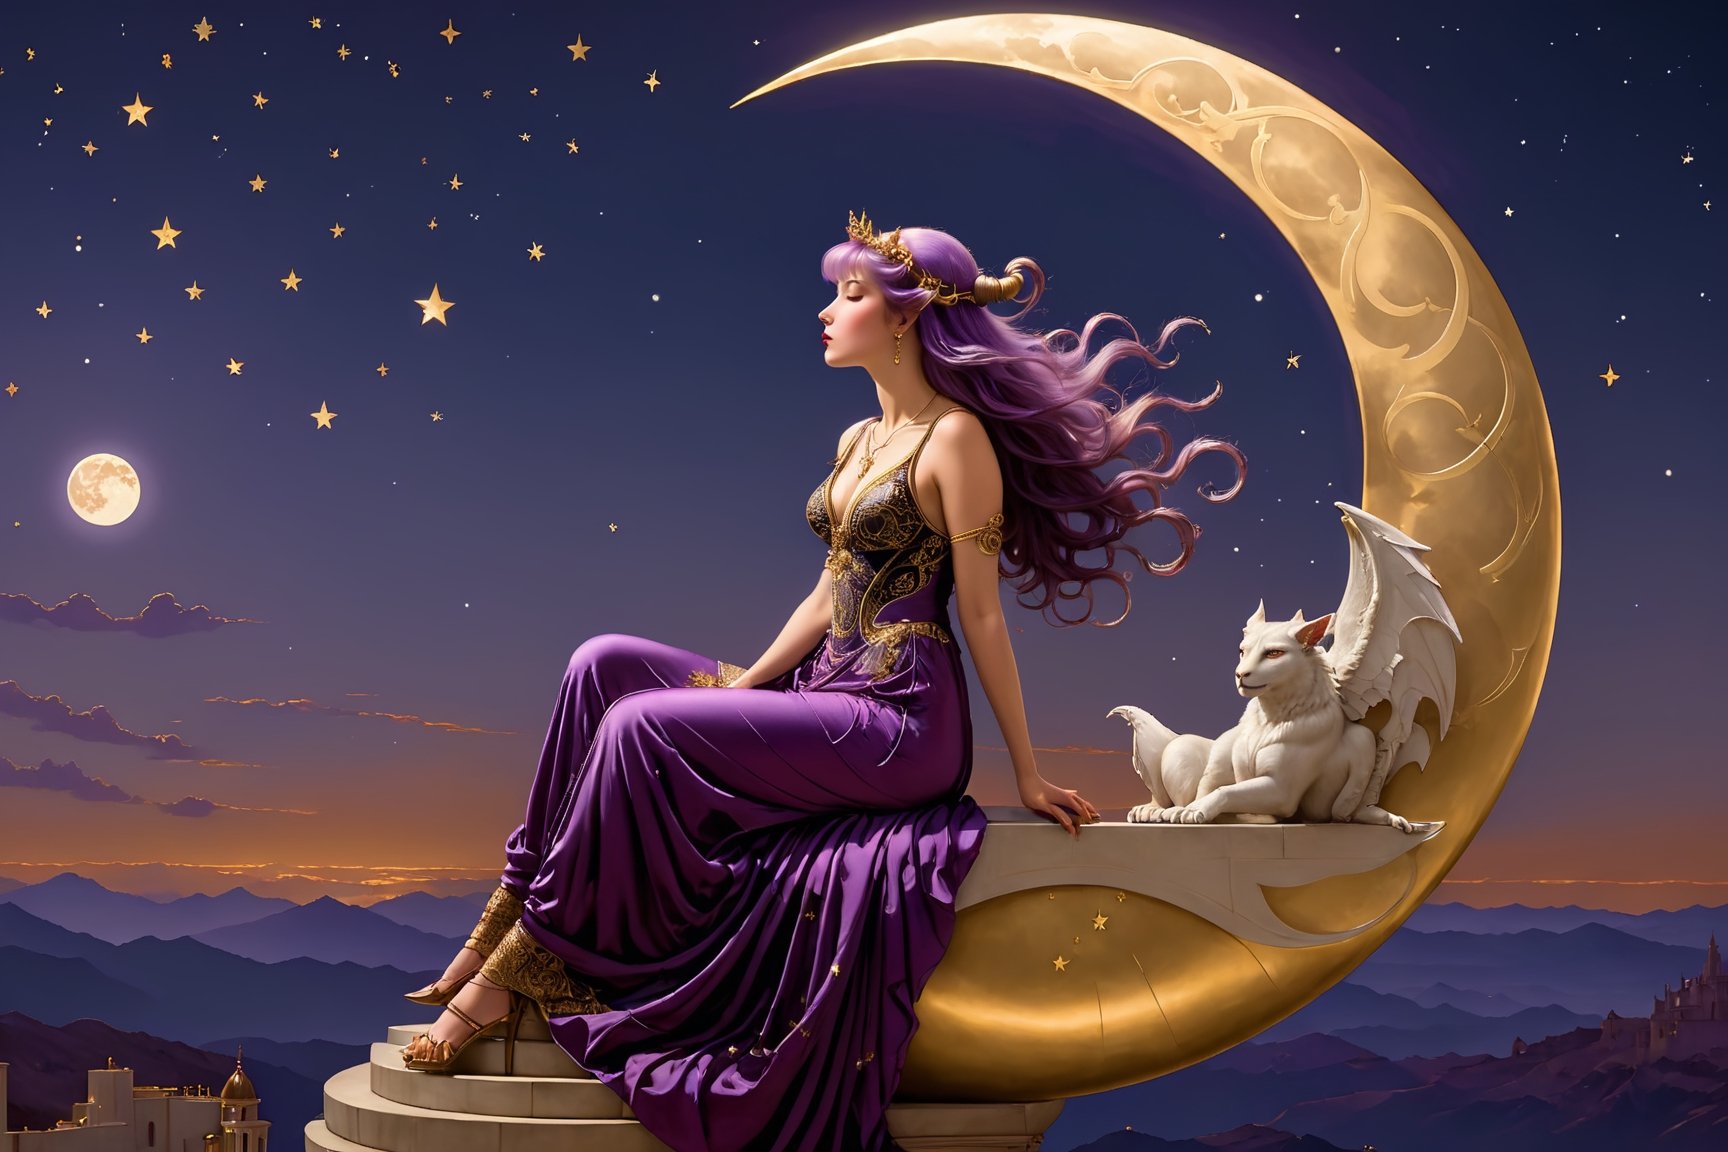 side view. full body shot, extreme long shot,  michael parkes style, pre-raphaelite, a beautiful young magical witch woman with long purple hair is sitting on a shiny golden crescent moon in the night sky. she is wearing an elaborate purple silk gown with intricate gold embroidery patterns. a gargoyle is sitting on the top of the moon looking down. stars are in the sky. glowing spheres orbs with etched intricate patterns are floating in the sky,  michael parkes, artist study hands. ,1girl,Masterpiece